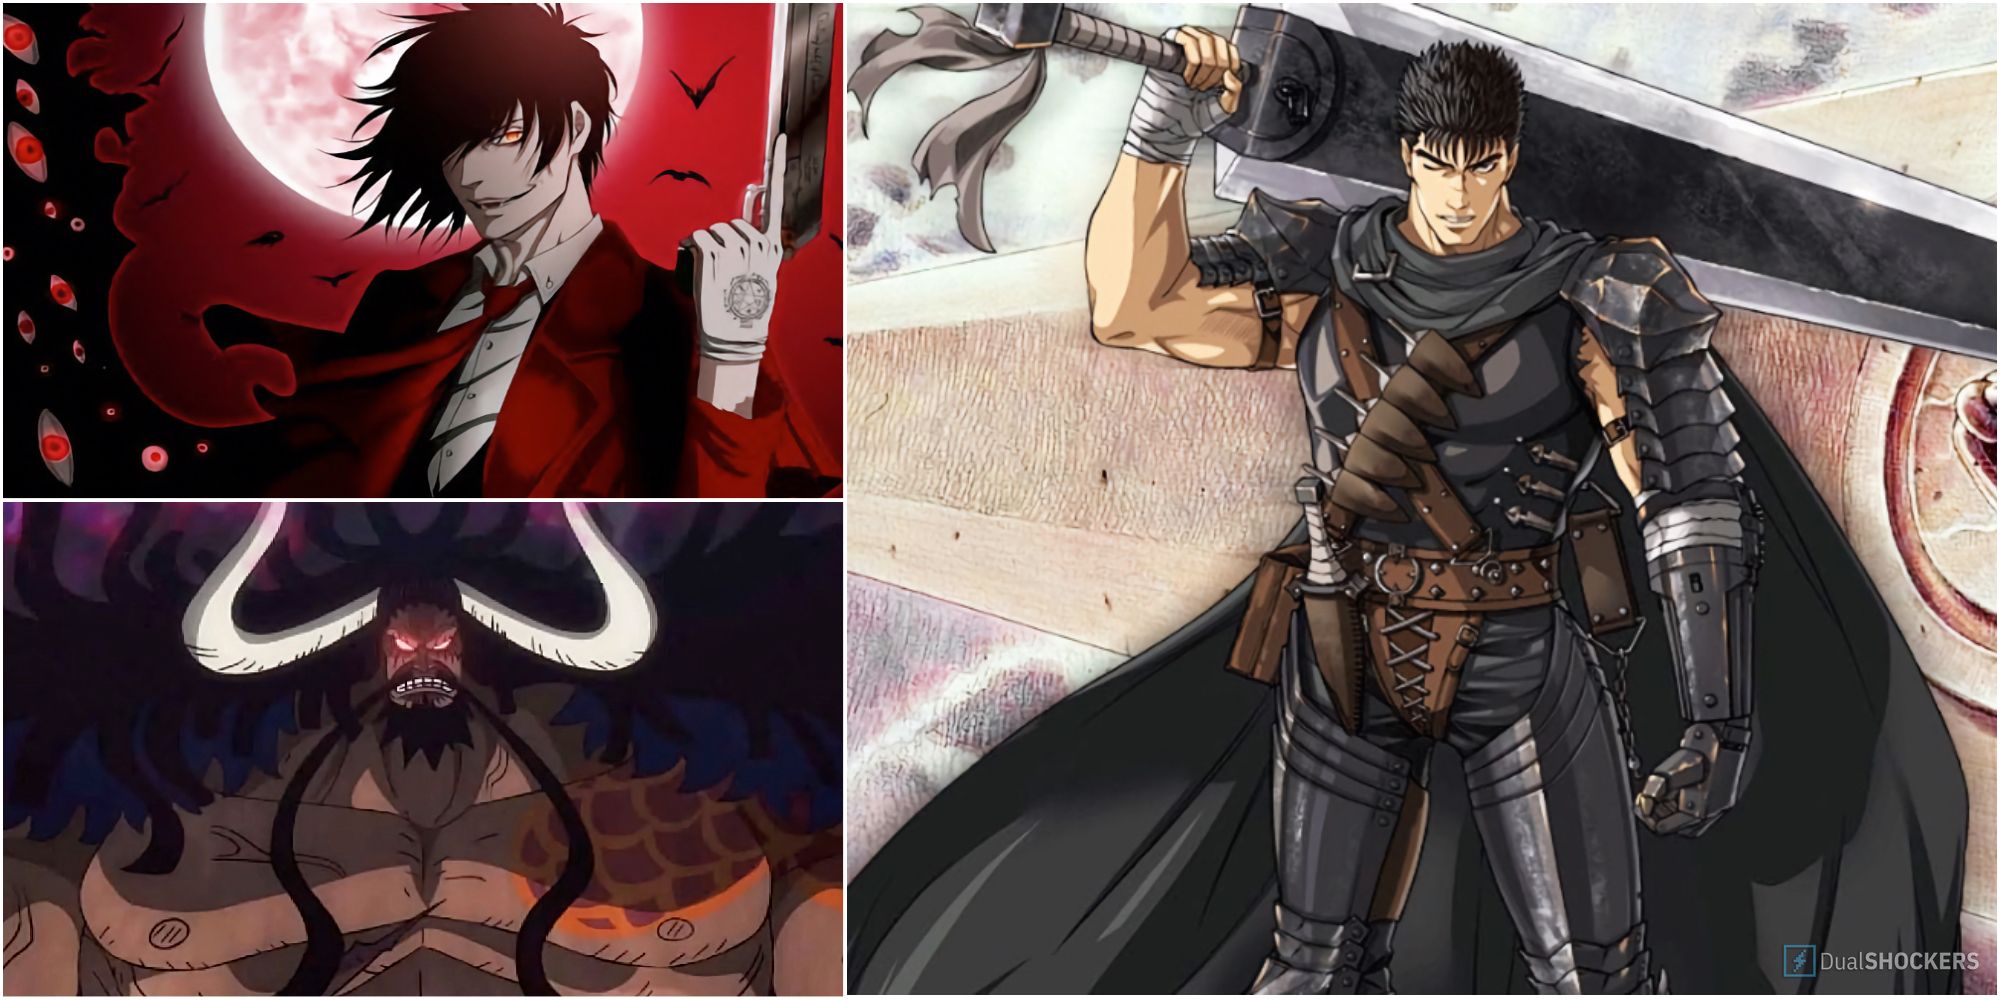 10 Most Brutal And Violent Anime Recommendations